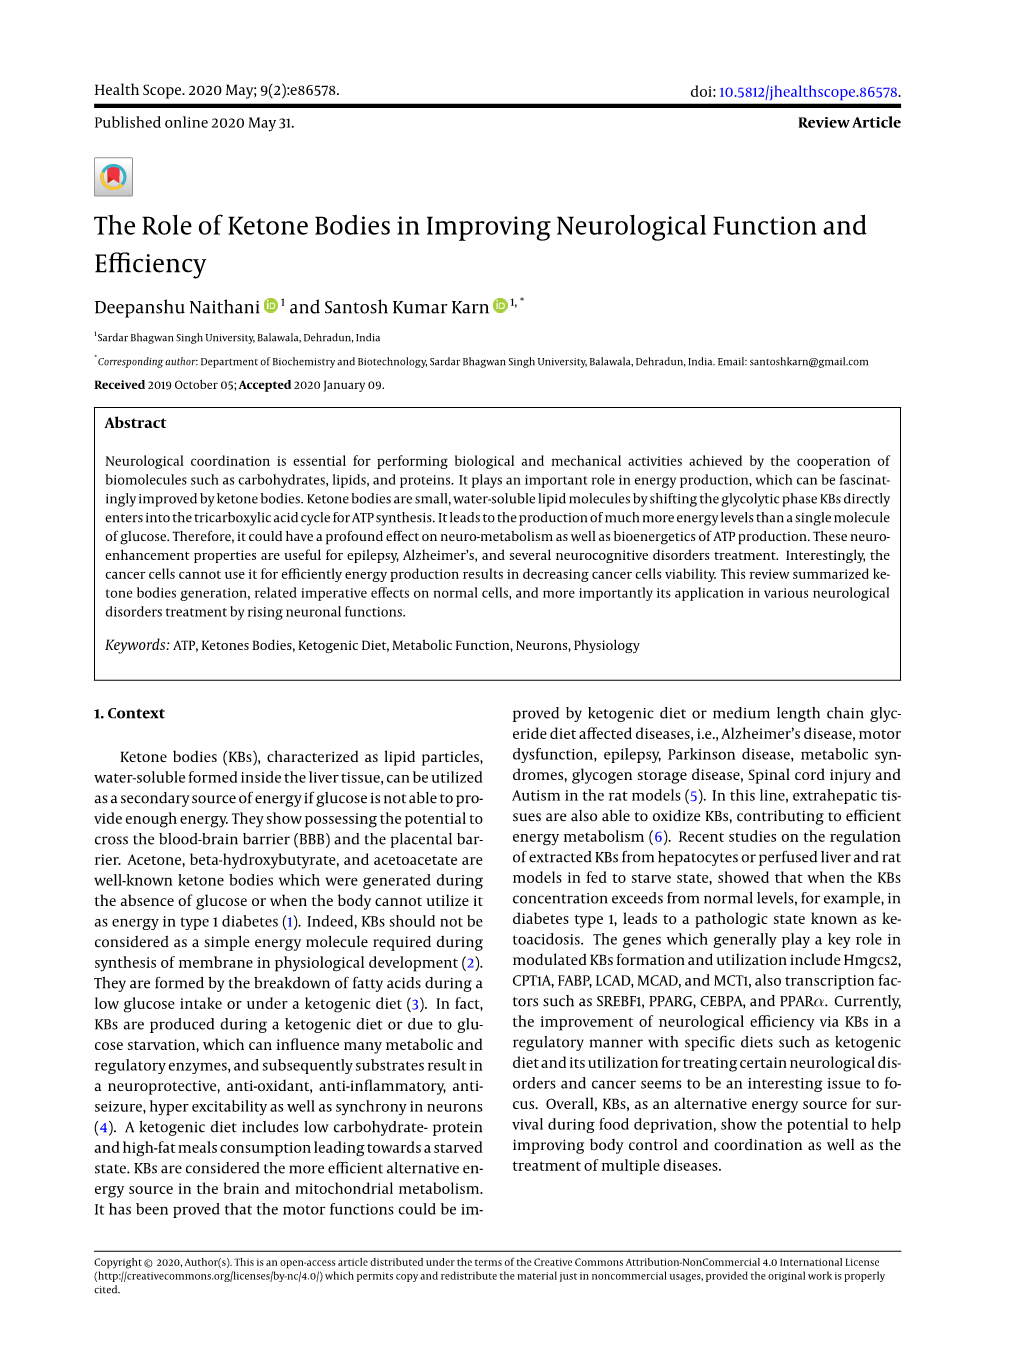 The Role of Ketone Bodies in Improving Neurological Function and Eﬃciency